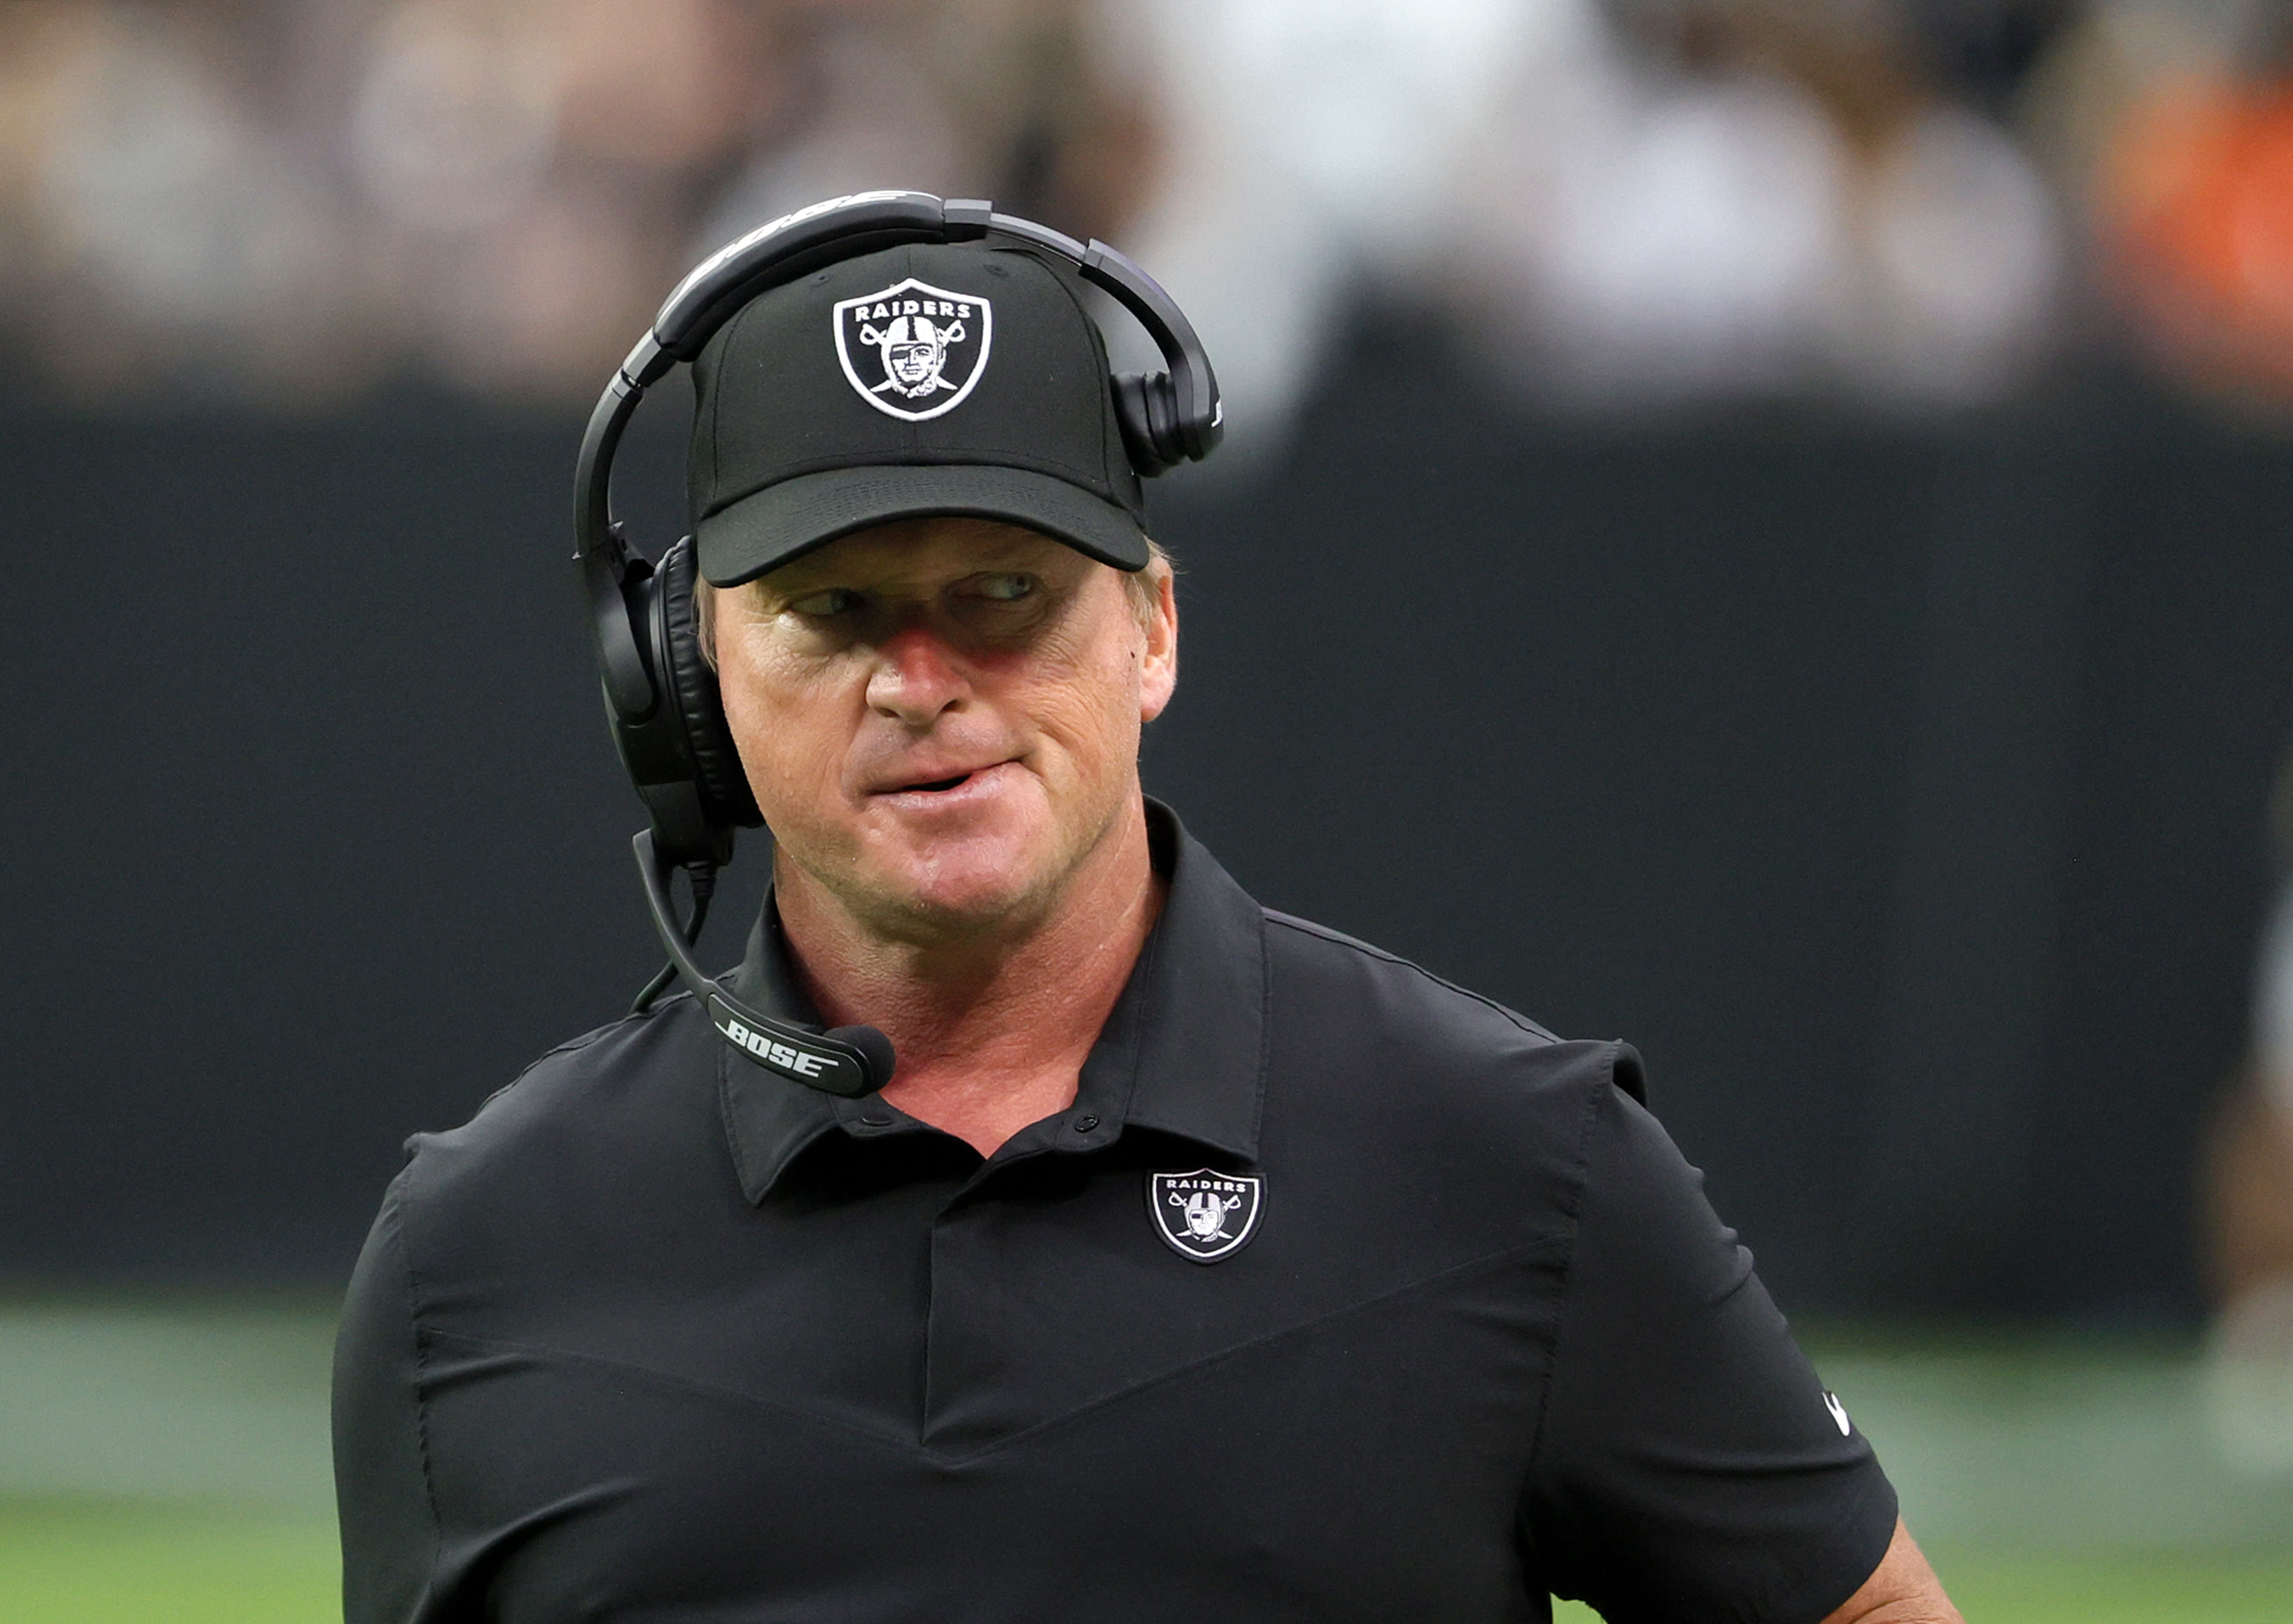 Nevada Supreme Court panel rules in favor of NFL in Jon Gruden lawsuit; case to go to arbitration pending appeal